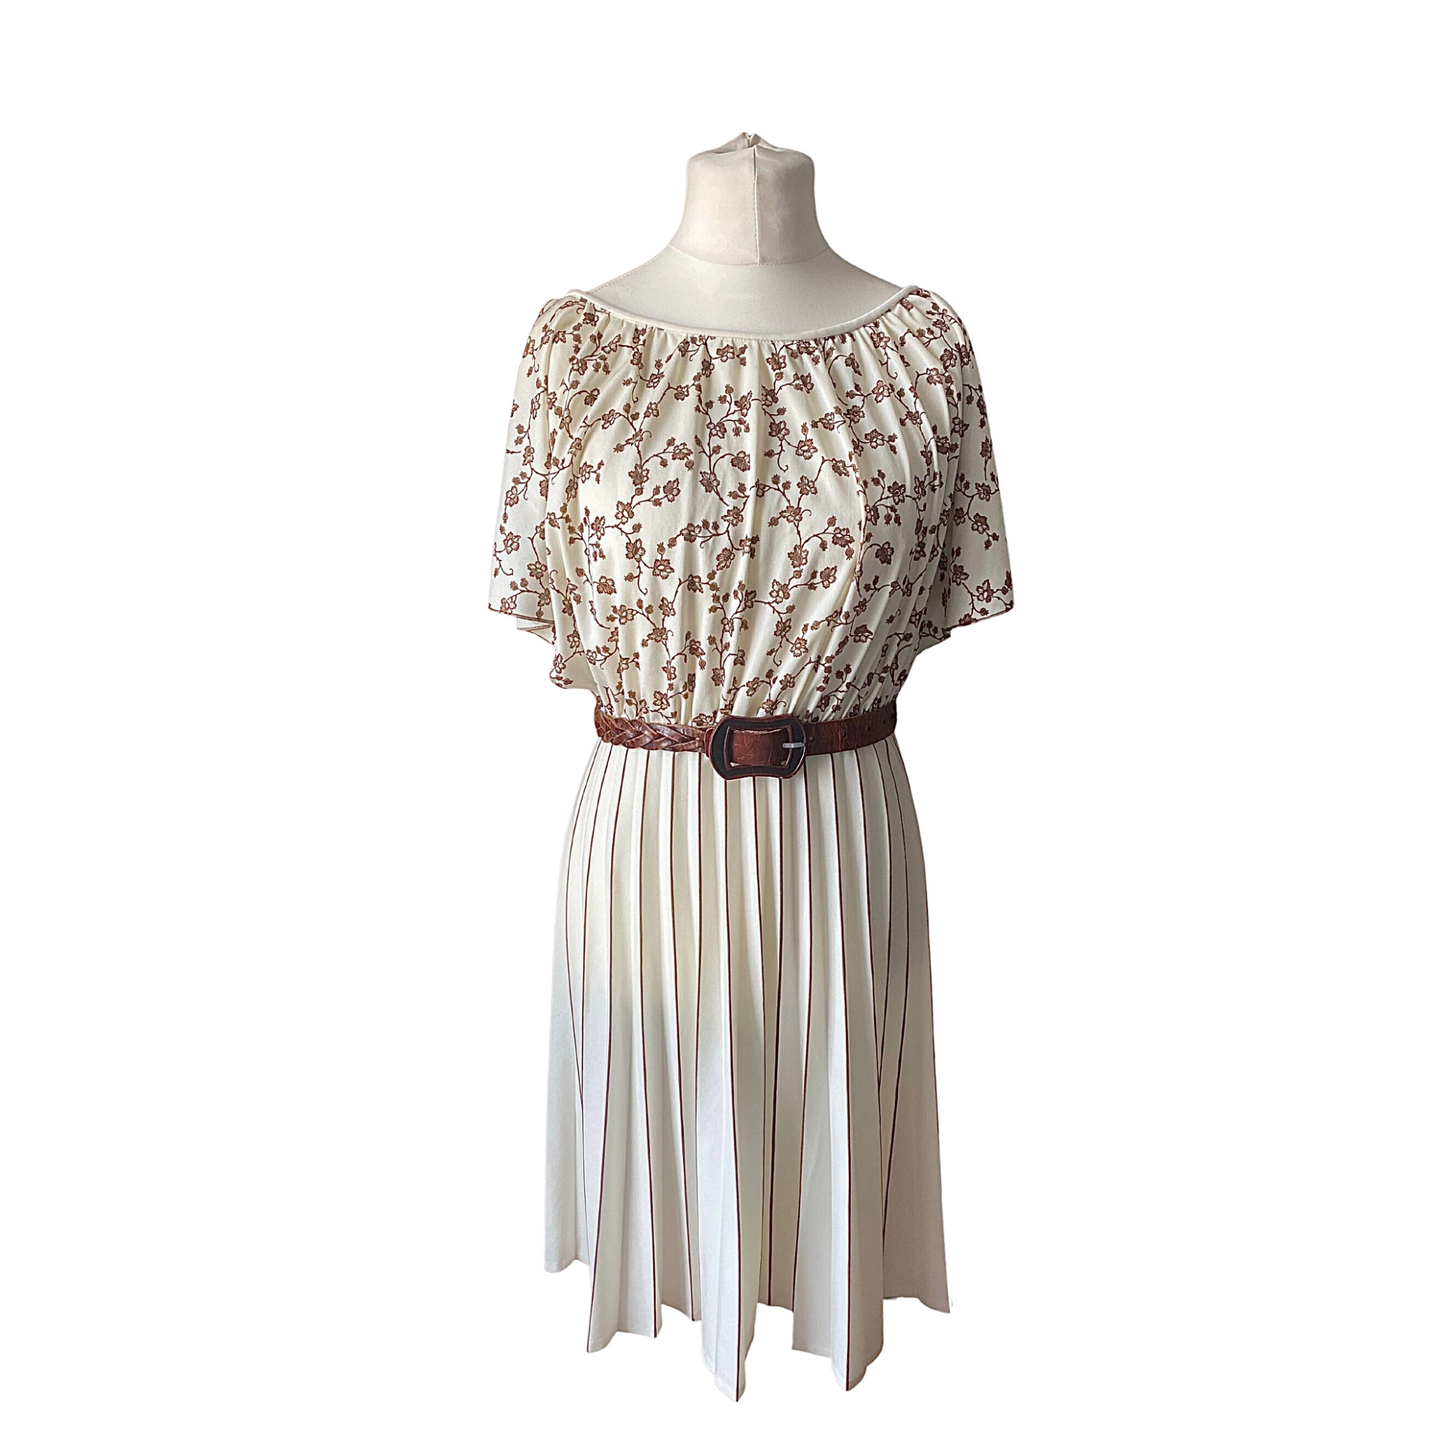 80s cream and brown midi dress with floral bodice and angel sleeves.  Approx U. K. size 10 -12